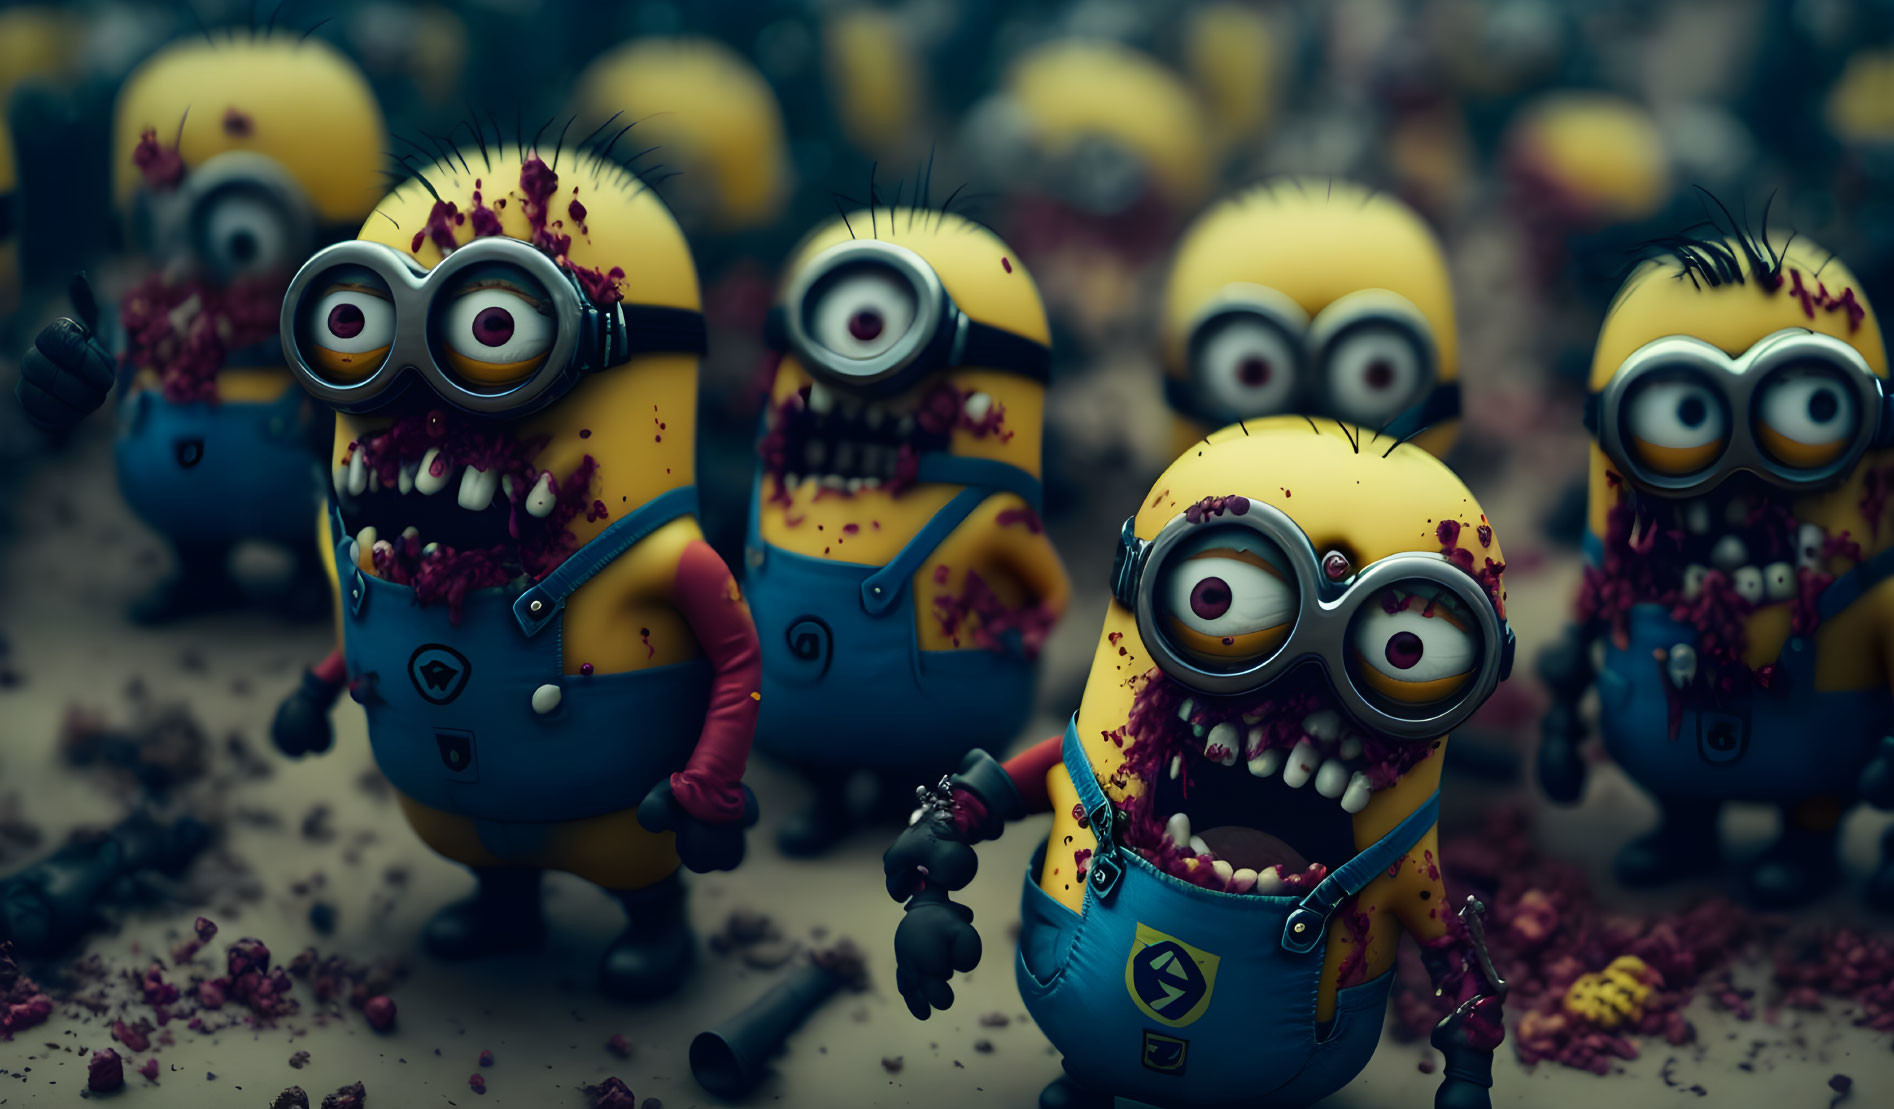 Group of Minions with different eye numbers in chaotic setting